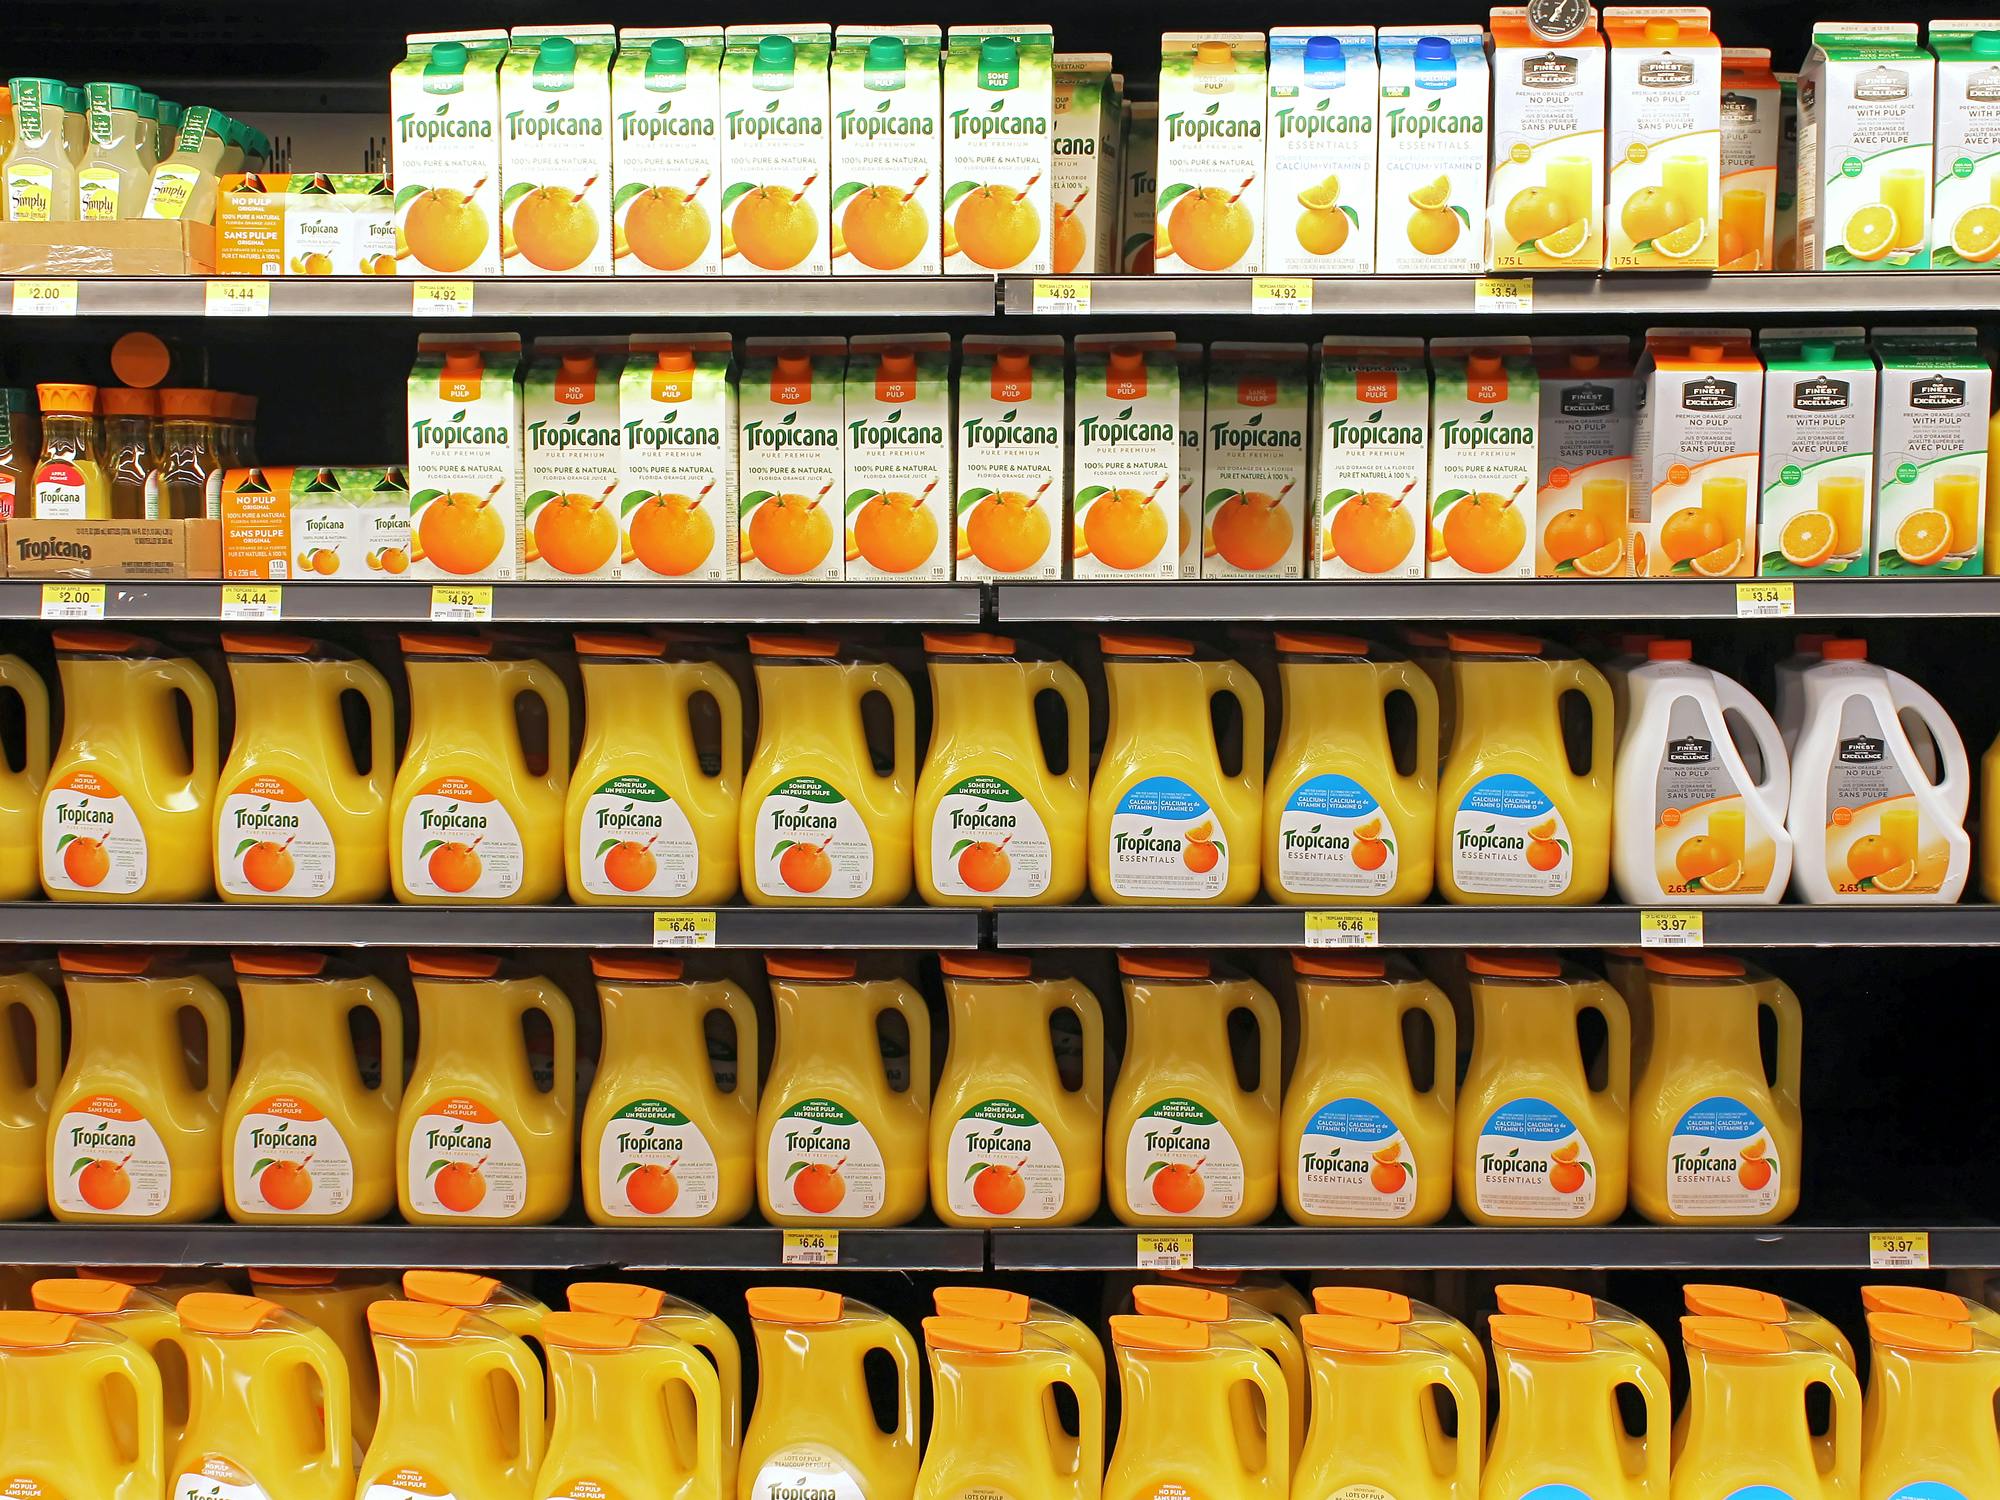 tropicana and simply orange juice bottles on store shelves